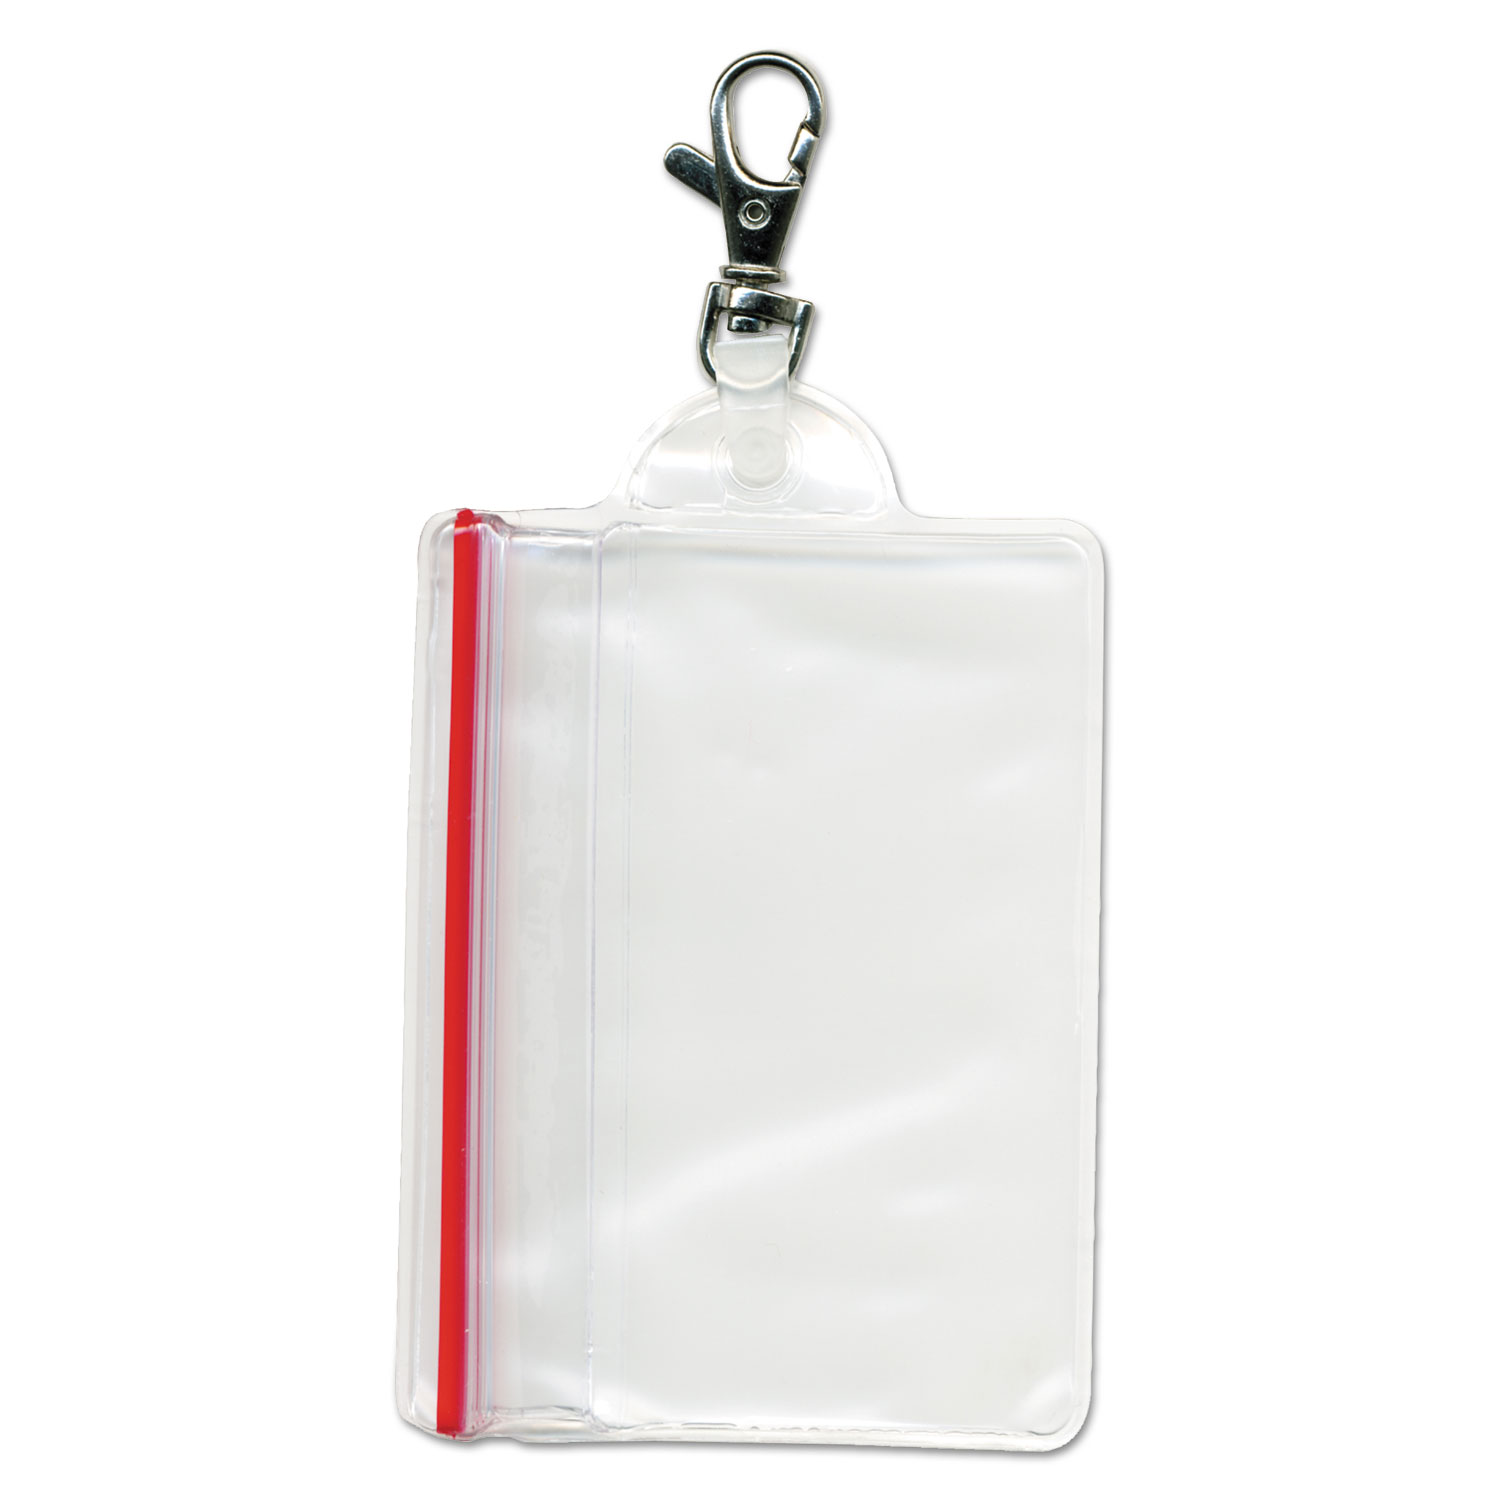 Sealable Holder with Lobster Claw, 2 1/2 x 3 3/4, Vertical, Clear, 25 per Pack